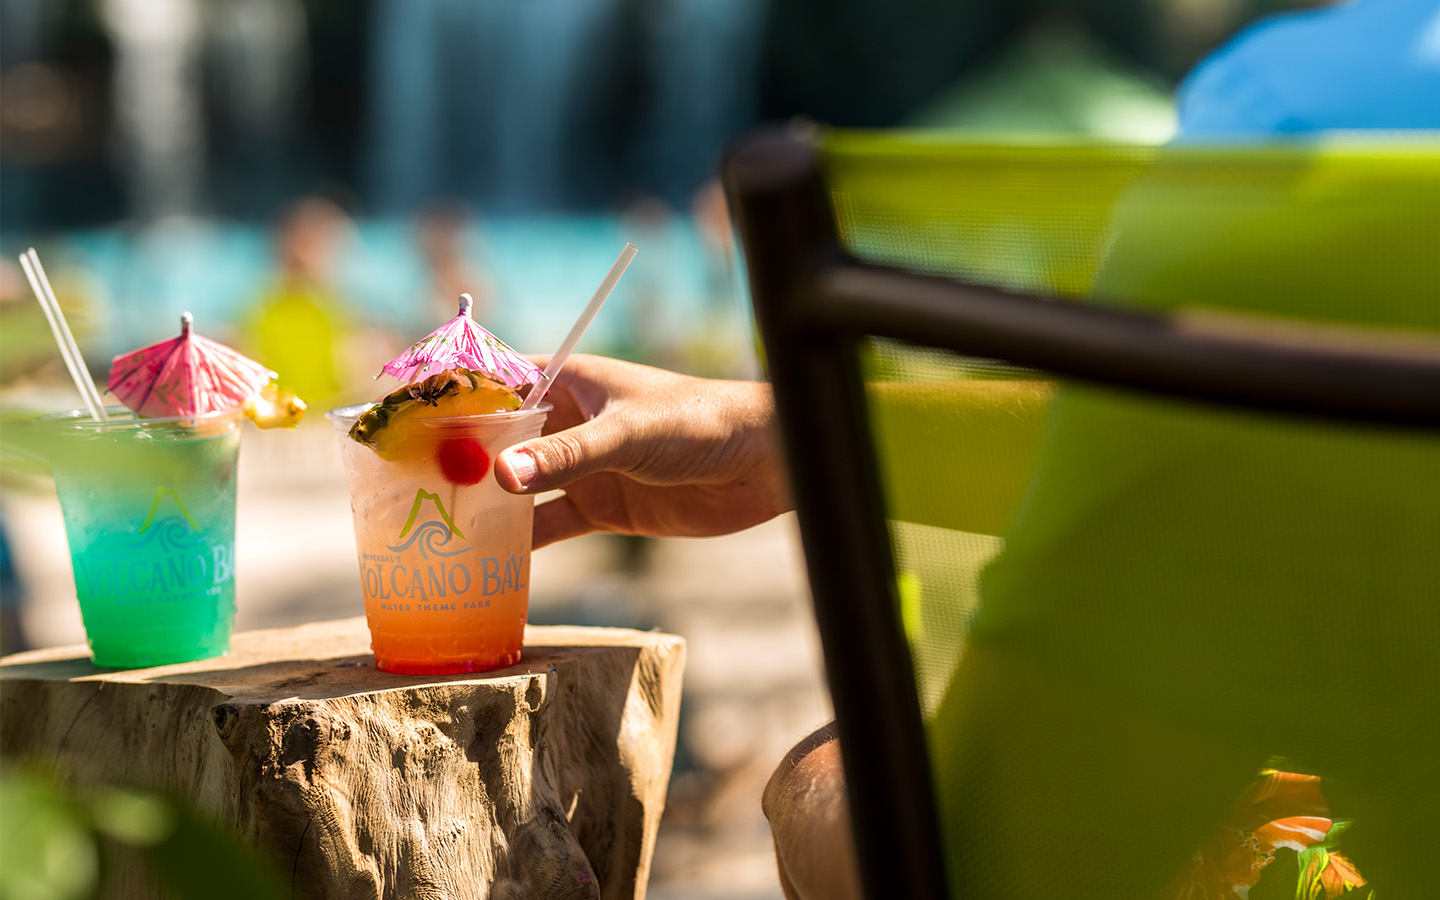 Enjoy one of the 12 signature drinks at Universal's Volcano Bay.